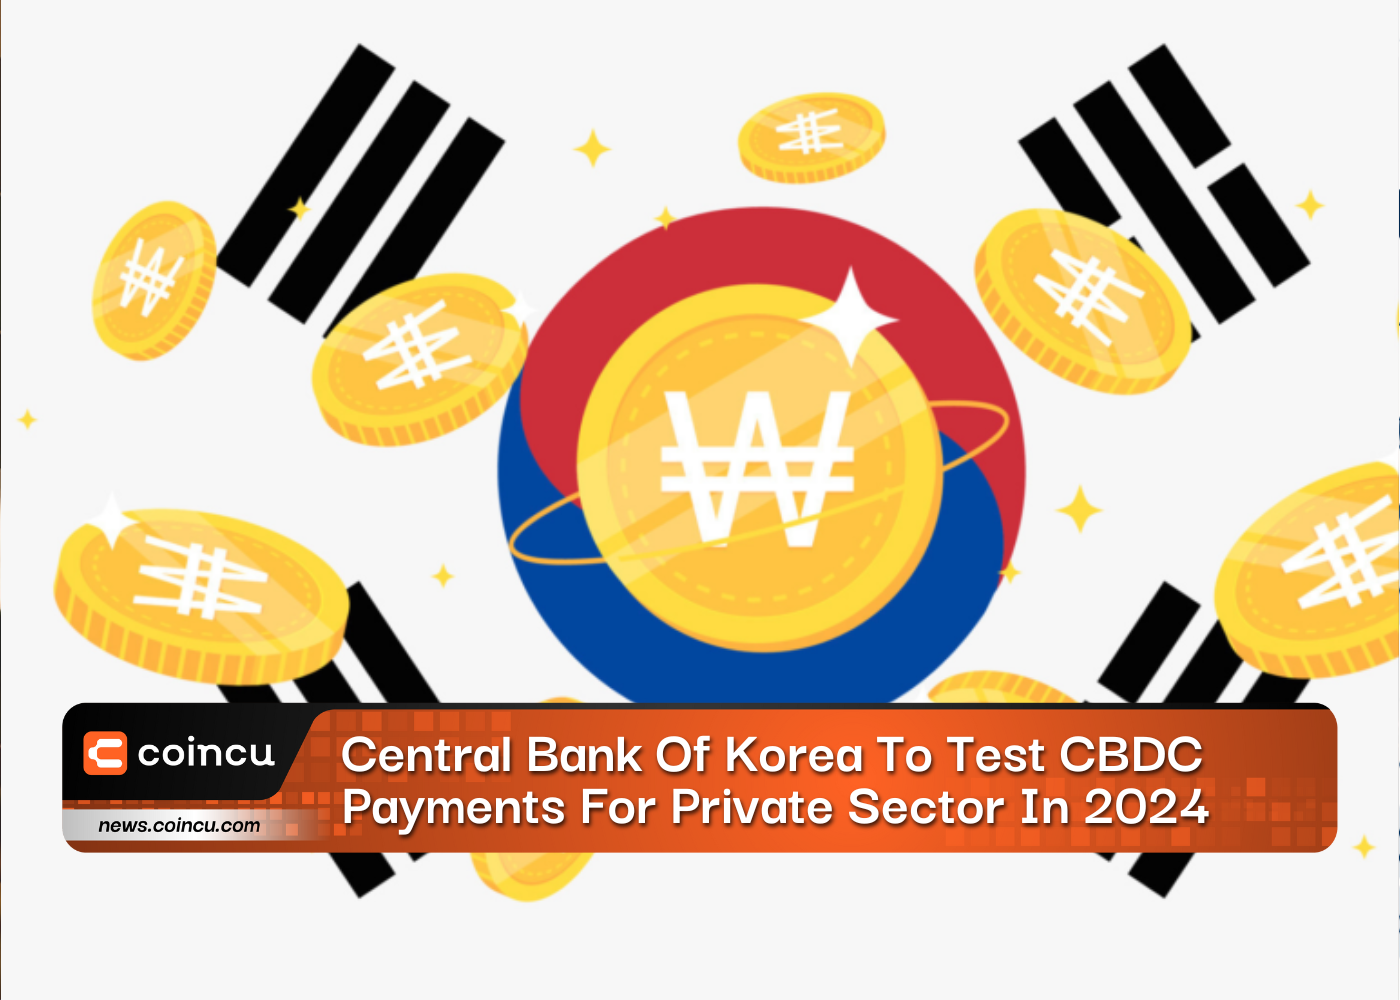 Central Bank Of Korea To Test CBDC Payments For Private Sector In 2024